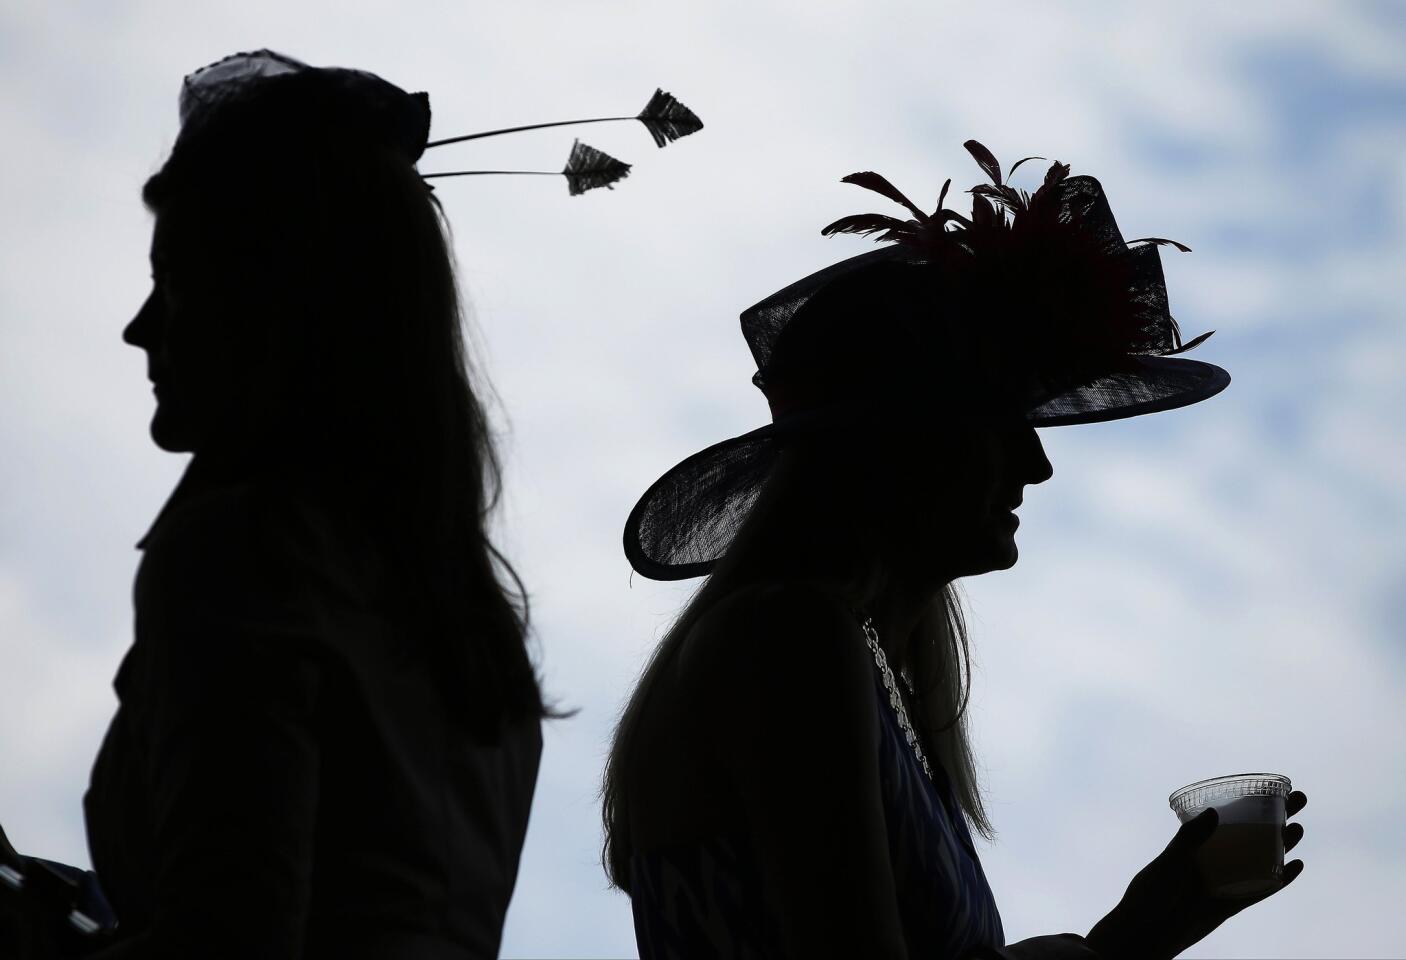 Kentucky Derby hats on parade